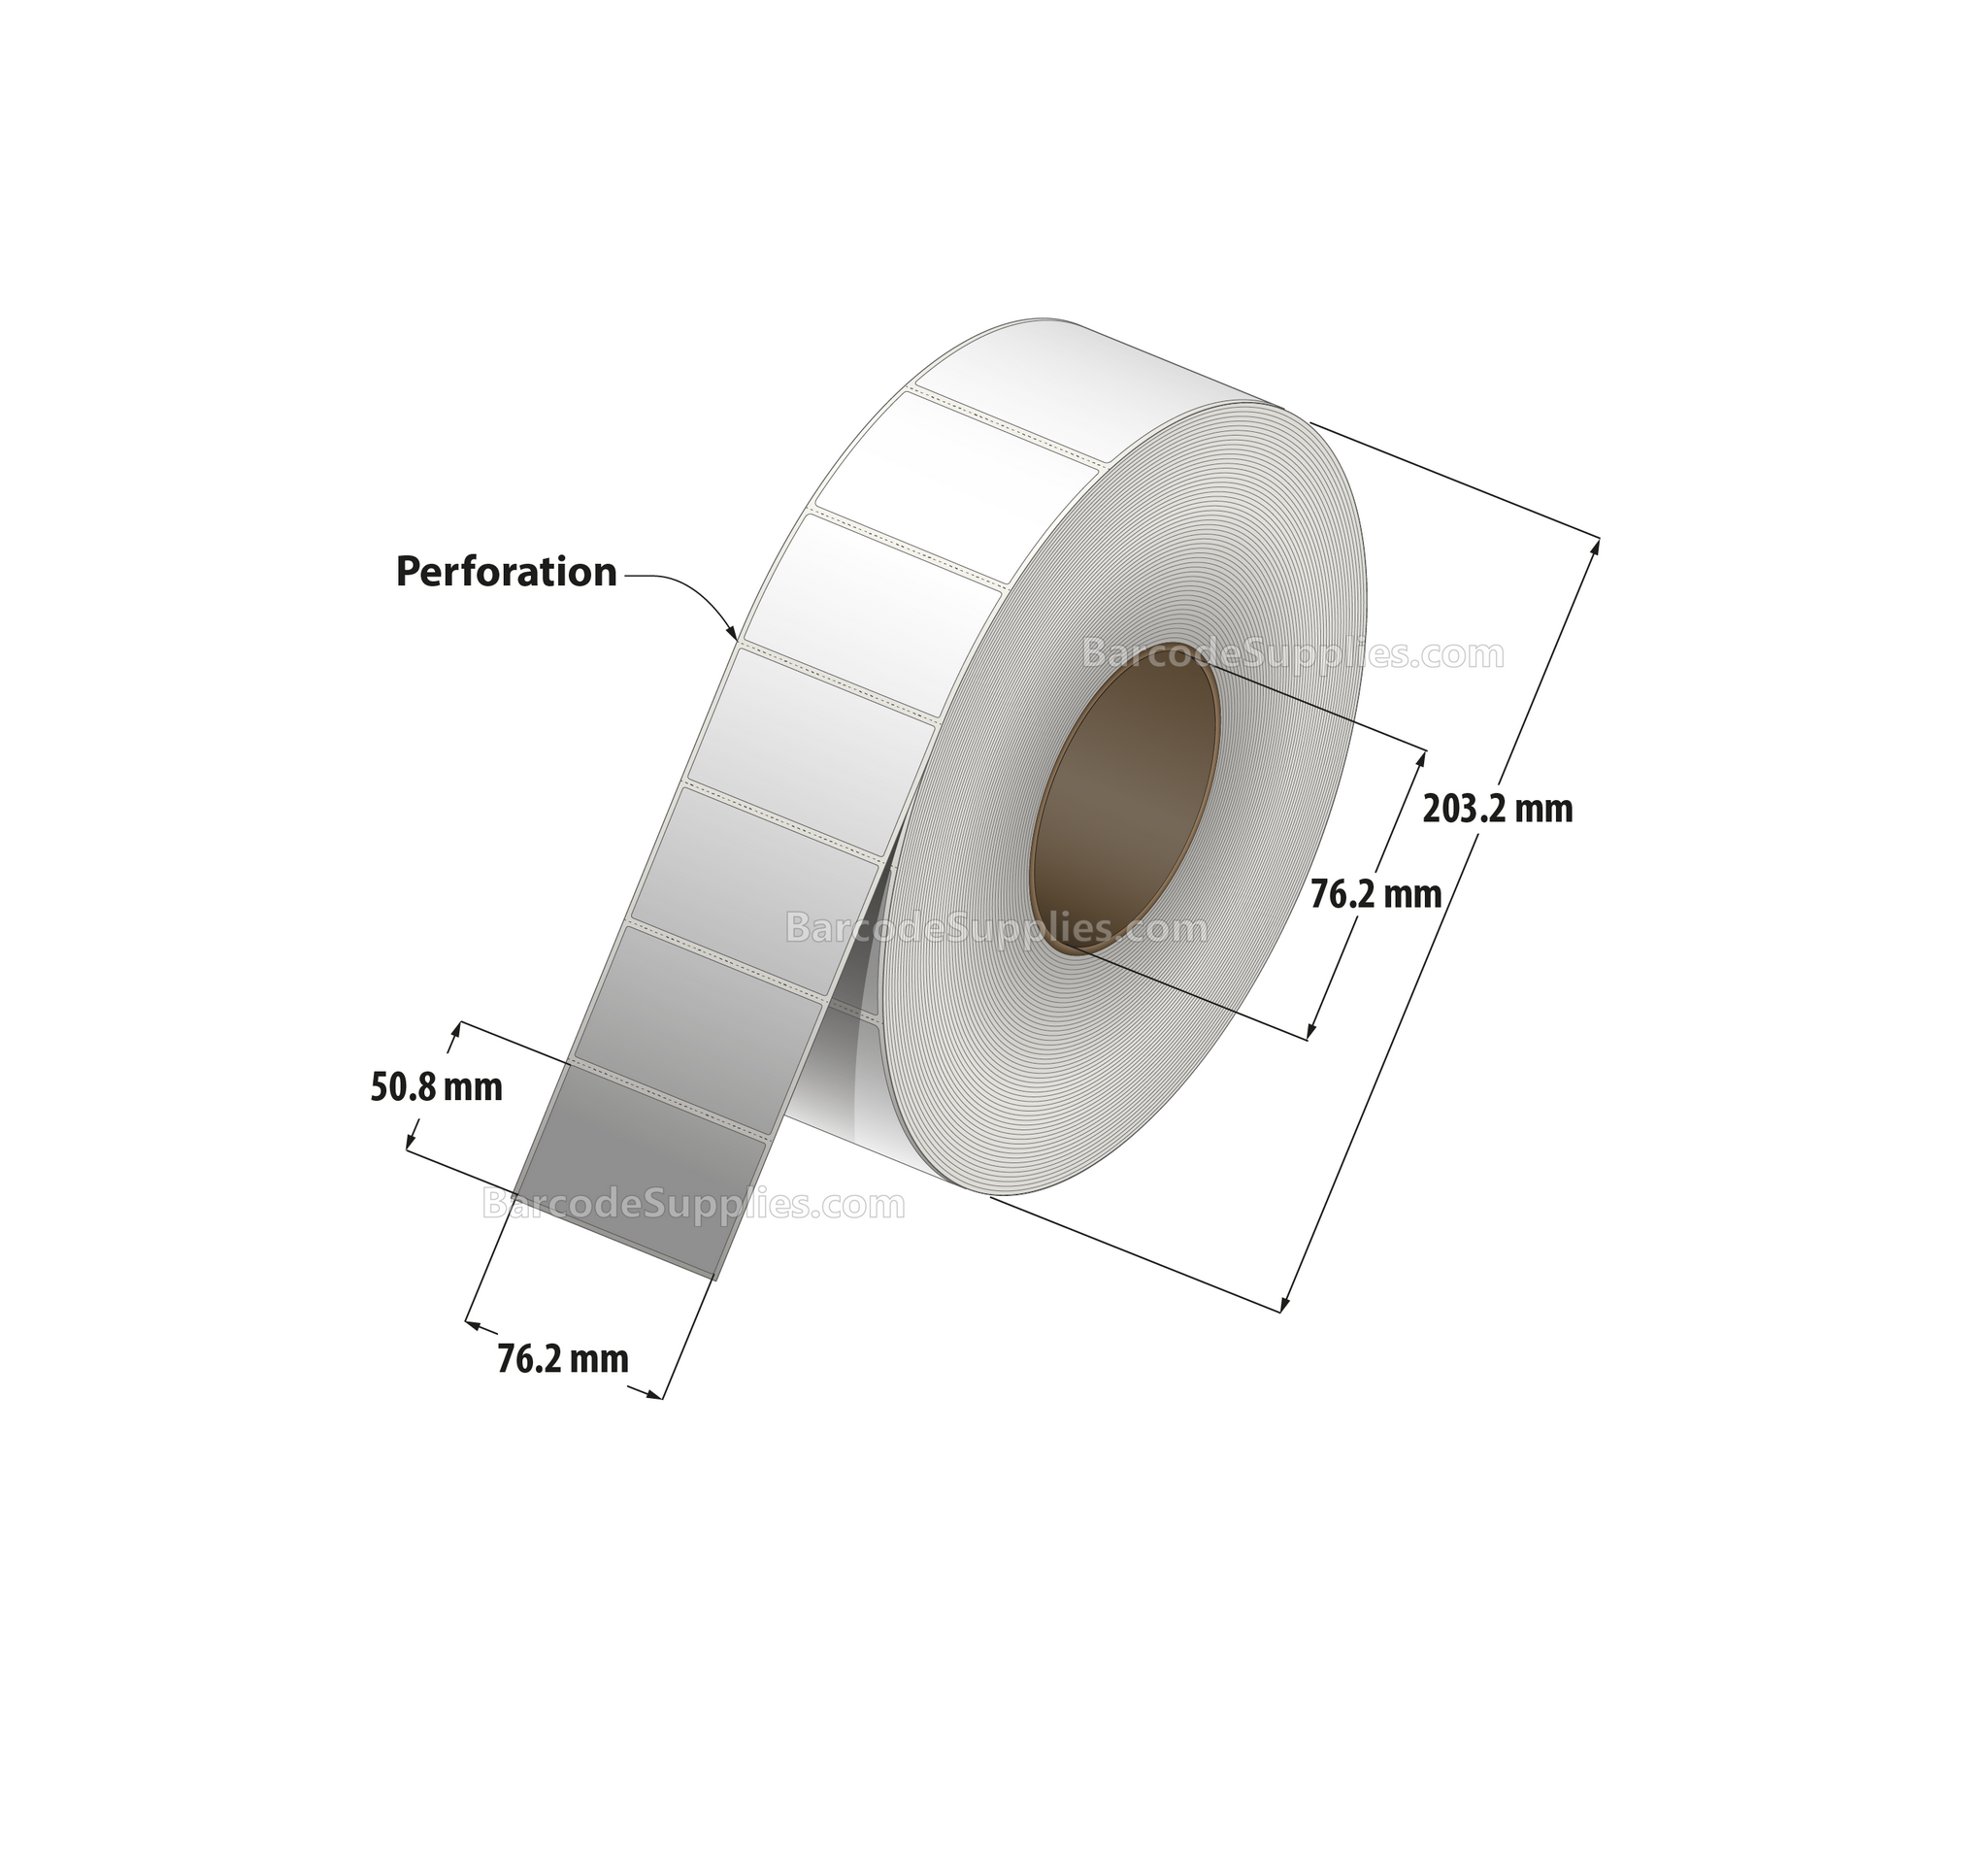 3 x 2 Thermal Transfer White Labels With Rubber Adhesive - Perforated - 3000 Labels Per Roll - Carton Of 6 Rolls - 18000 Labels Total - MPN: CTT300200-3P